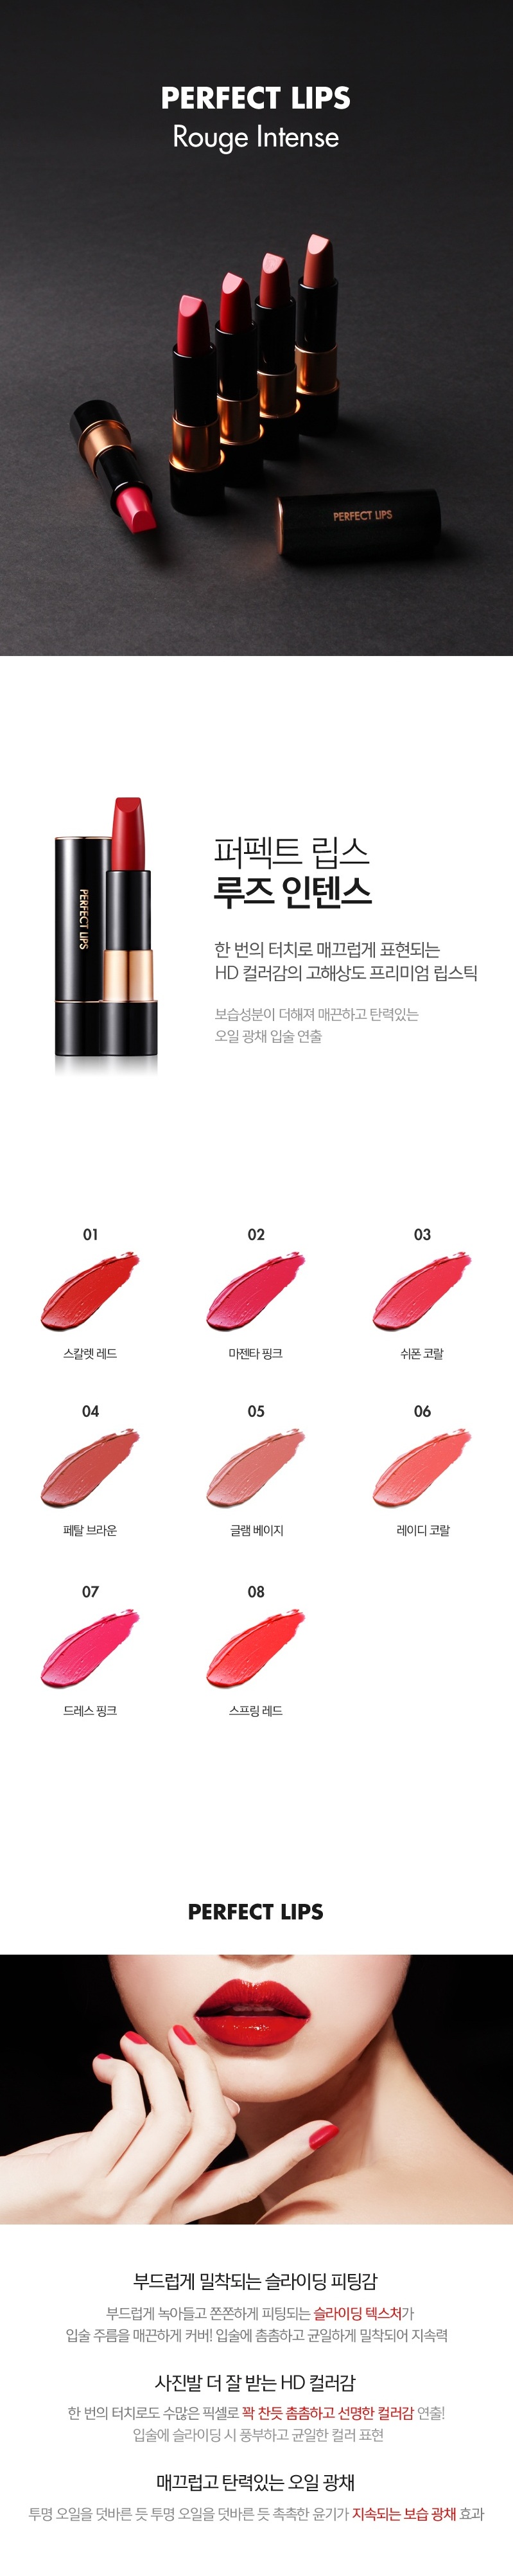 Tony Moly Perfect Lips Rouge Intense korean cosmetic makeup product online shop malaysia spain portugal1